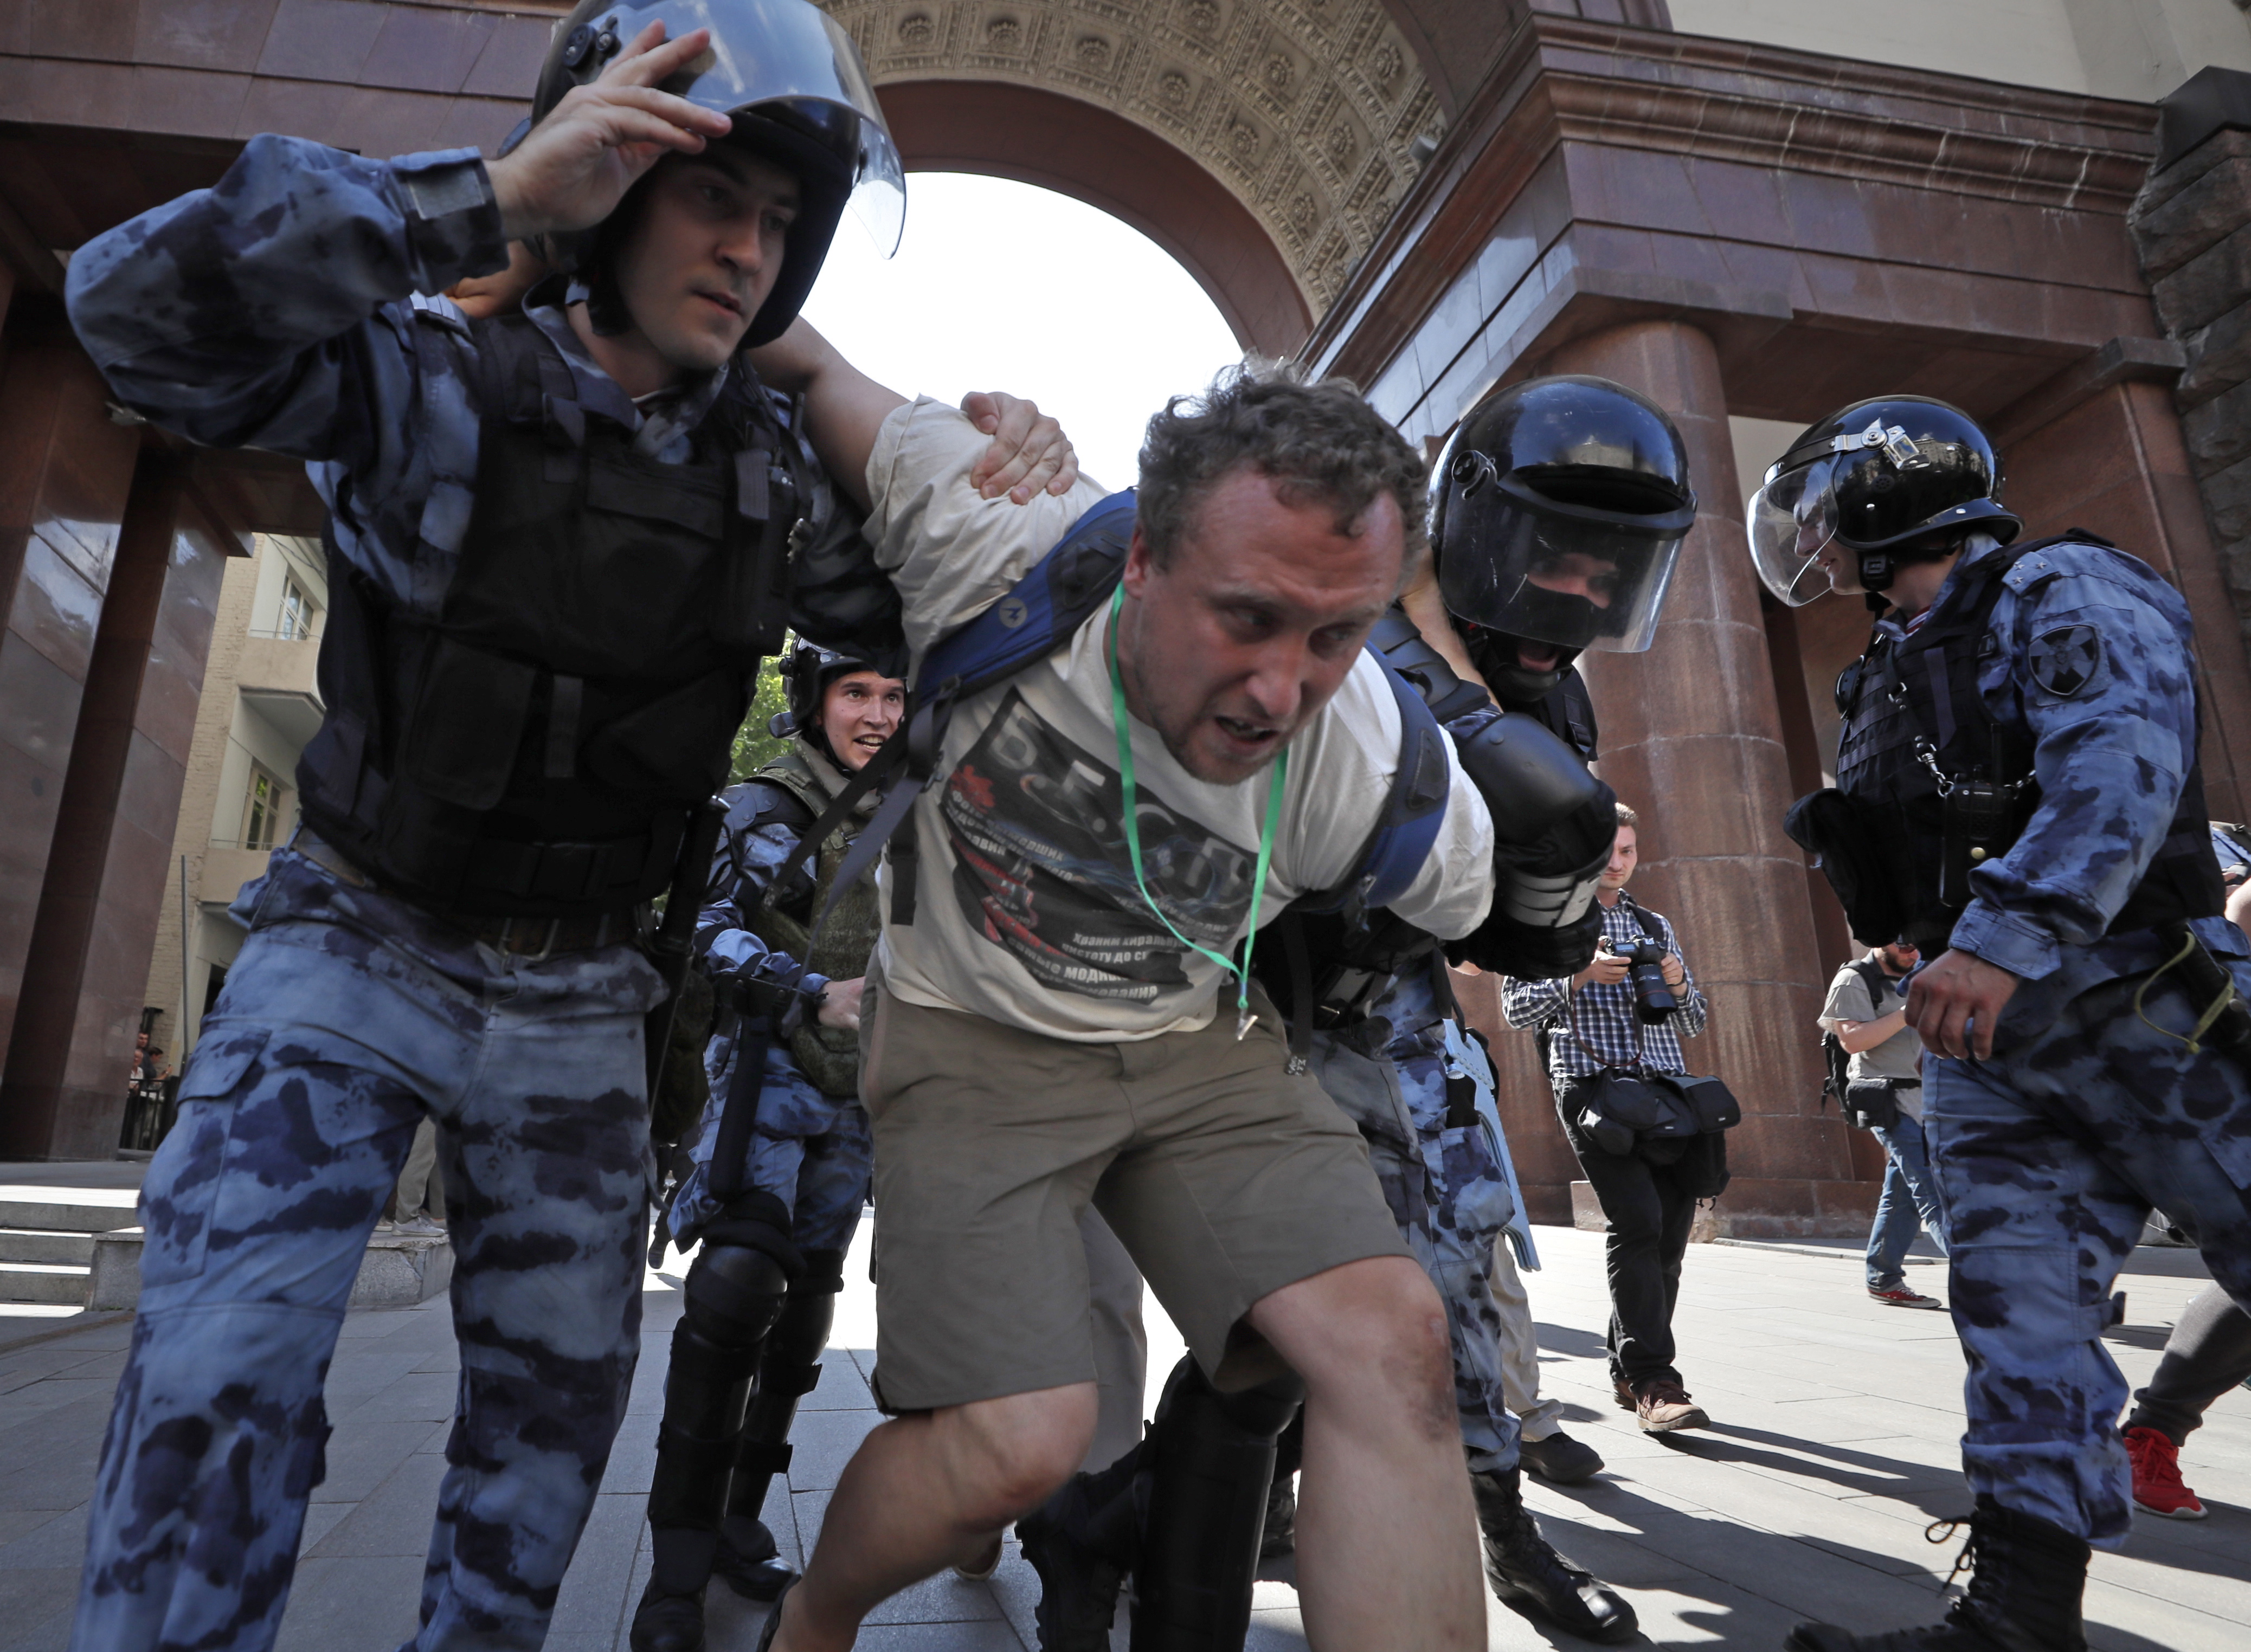 epa07744097 Russian riot police detain a participant of an unauthorized liberal opposition protest near the office of the mayor, in Moscow, Russia, 27 July 2019. Activists and protesters say that Russian election authorities are preventing opposition candidates from running in upcoming municipal elections for the Moscow City Duma, according to reports.  EPA/YURI KOCHETKOV